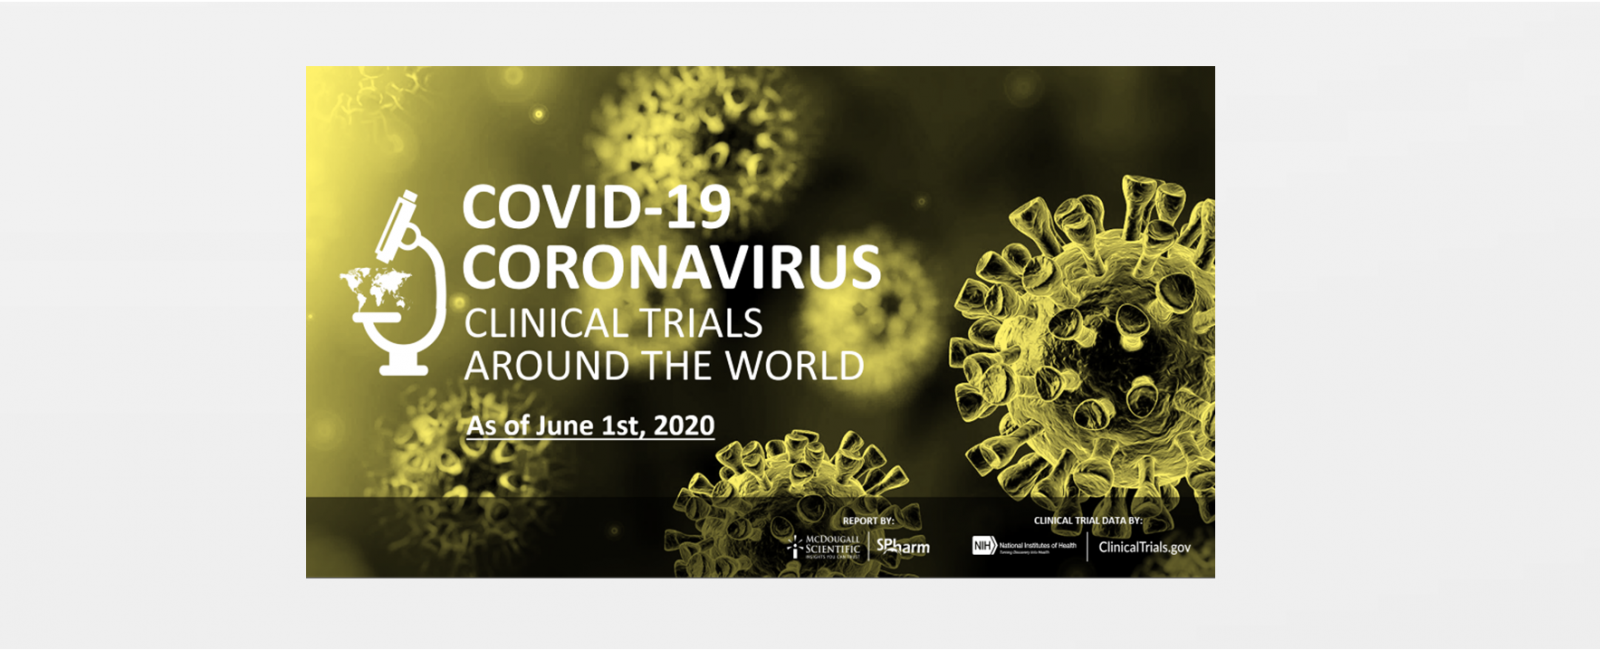 Worldwide Covid-19 Clinical Trials numbers for May